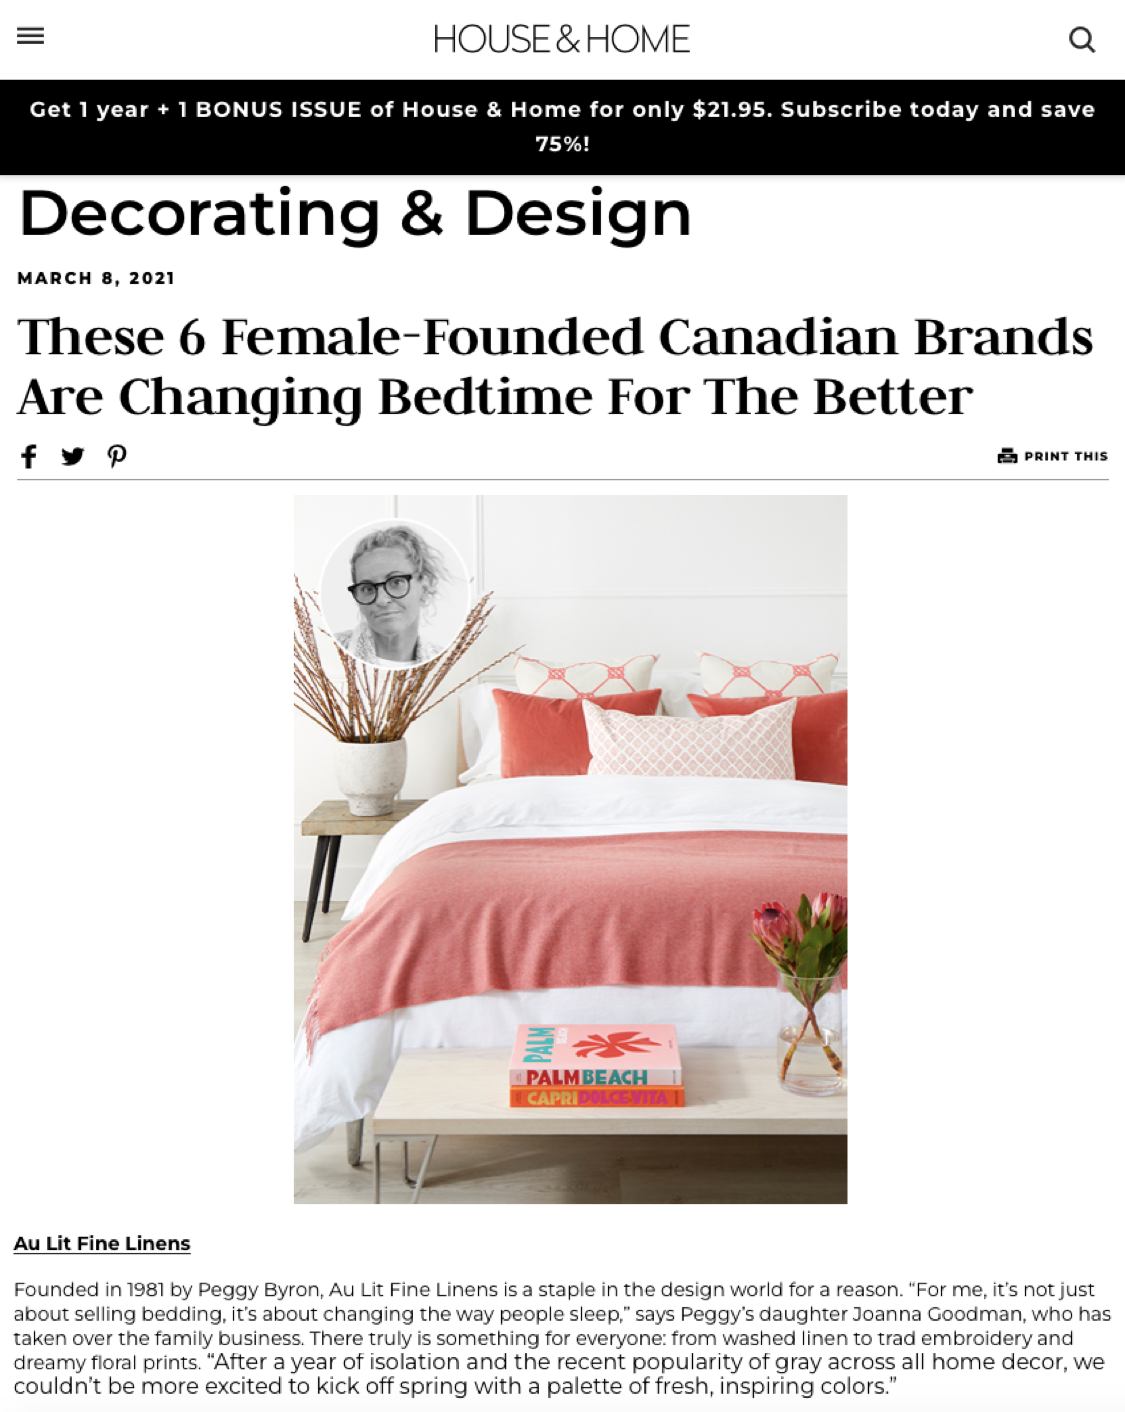 House & Home's Top Female-Founded Bedding Brands